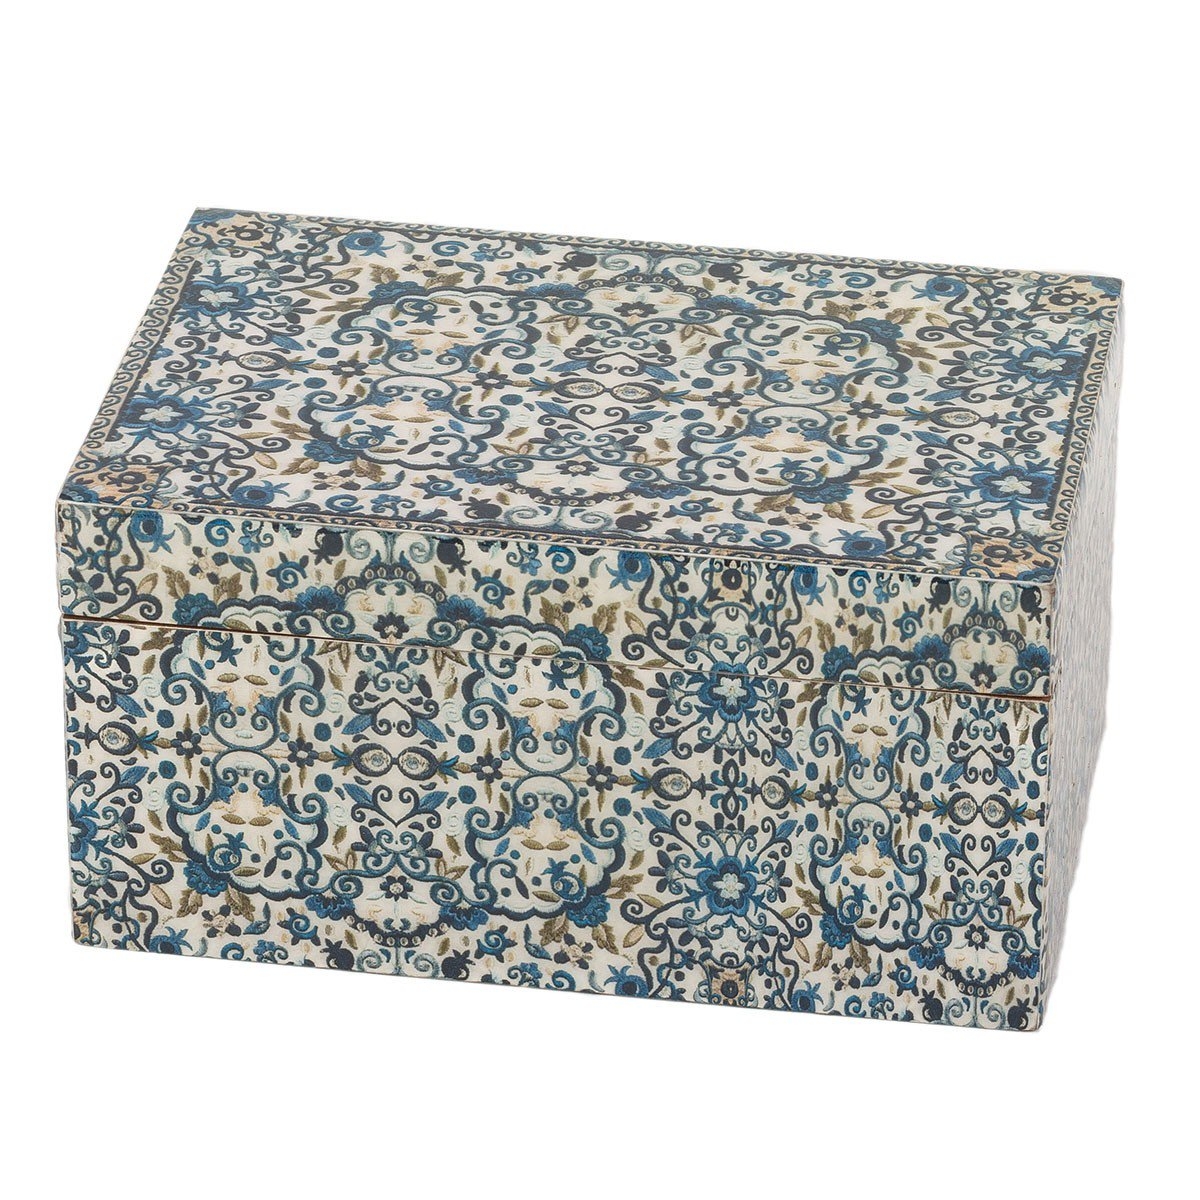 Yair Emanuel Wooden Jewelry Box with Flowers Design - 1